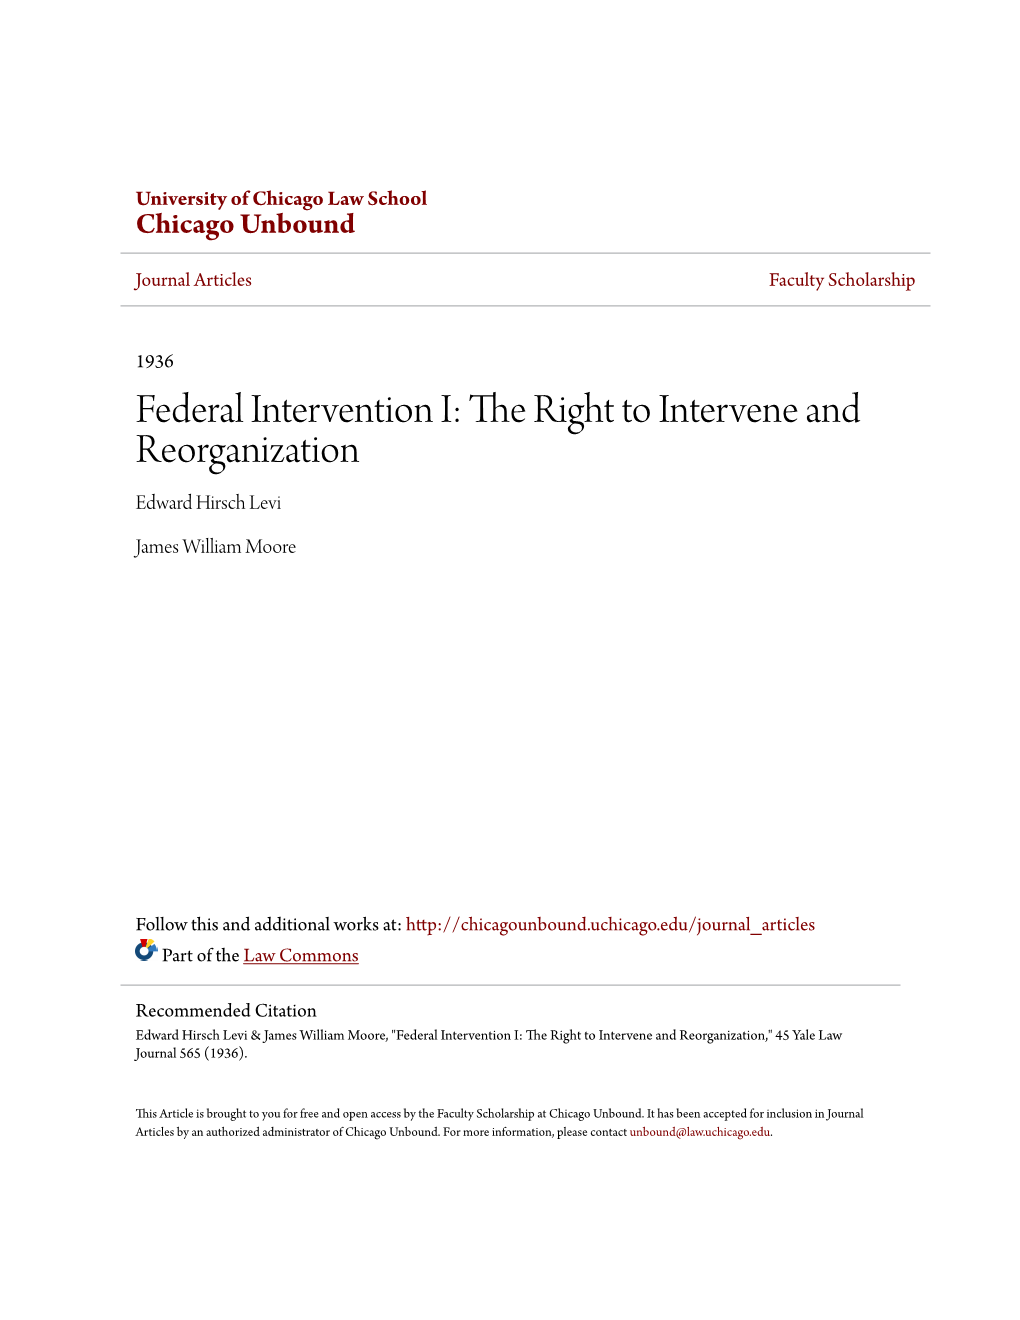 Federal Intervention I: the Right to Intervene and Reorganization Edward Hirsch Levi